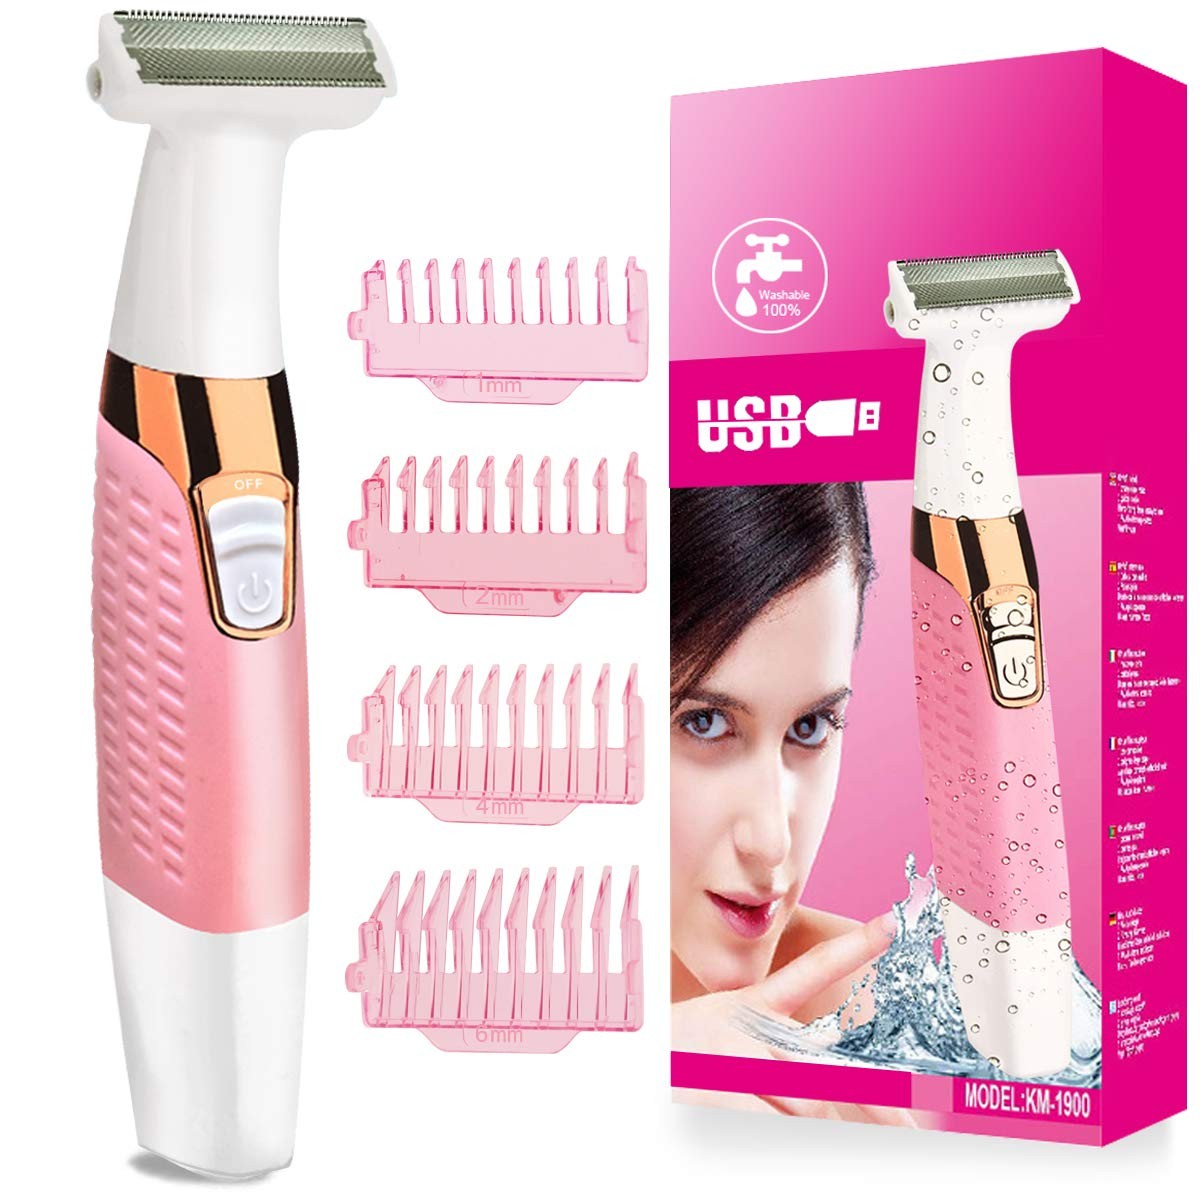 Women's Electric Shaver Bikini Trimmer Facial Hair Remover for Women Ladies Electric Razor for Face